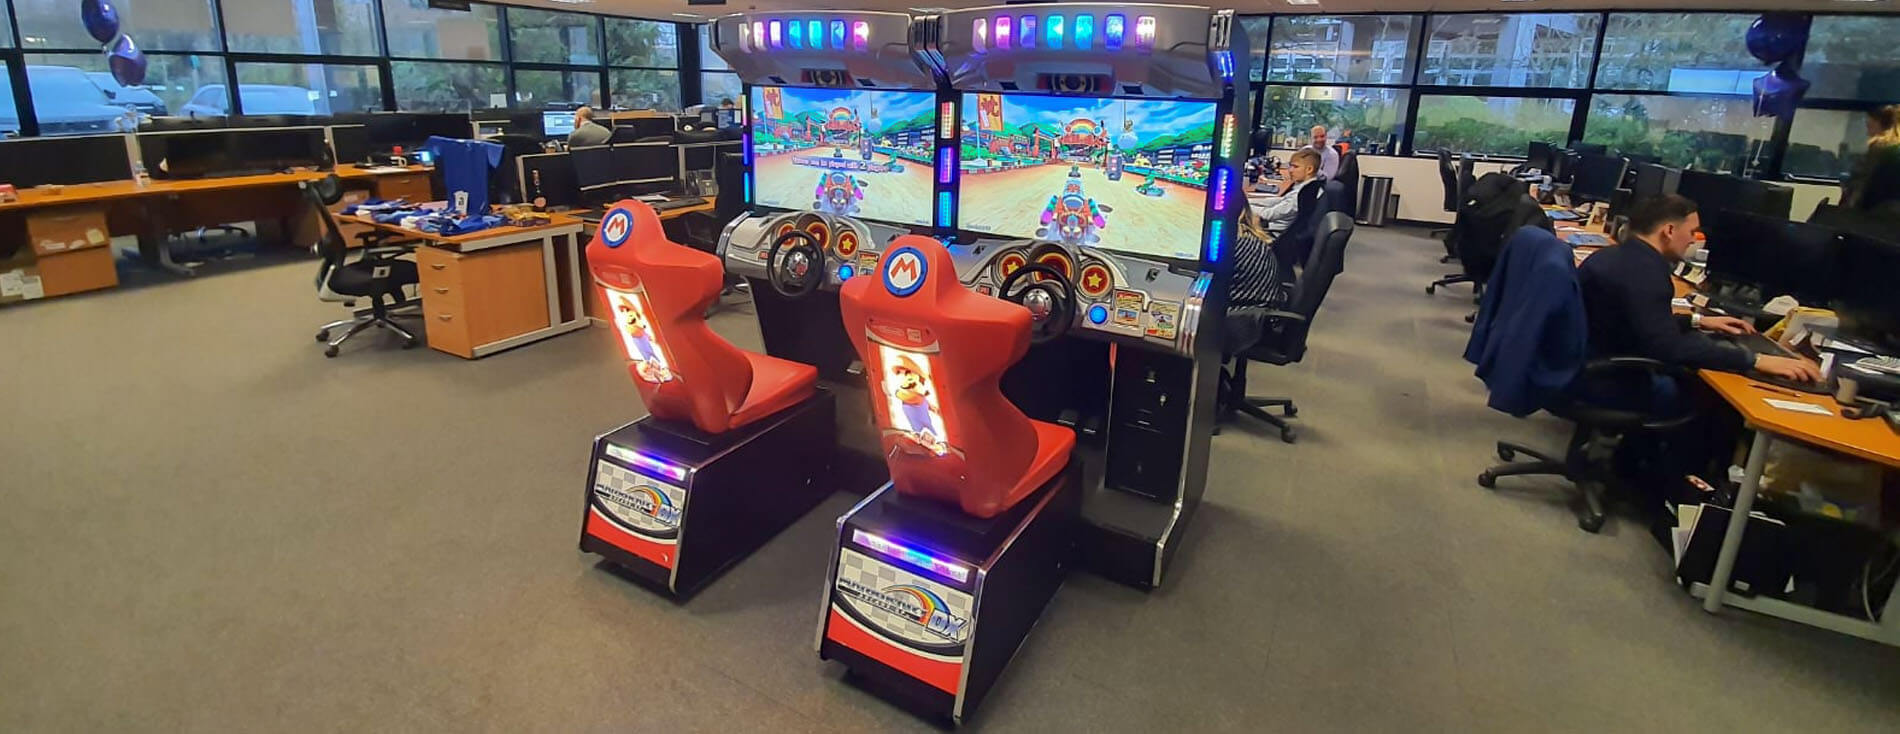 Mario Kart DX arcade machine hired for an office space